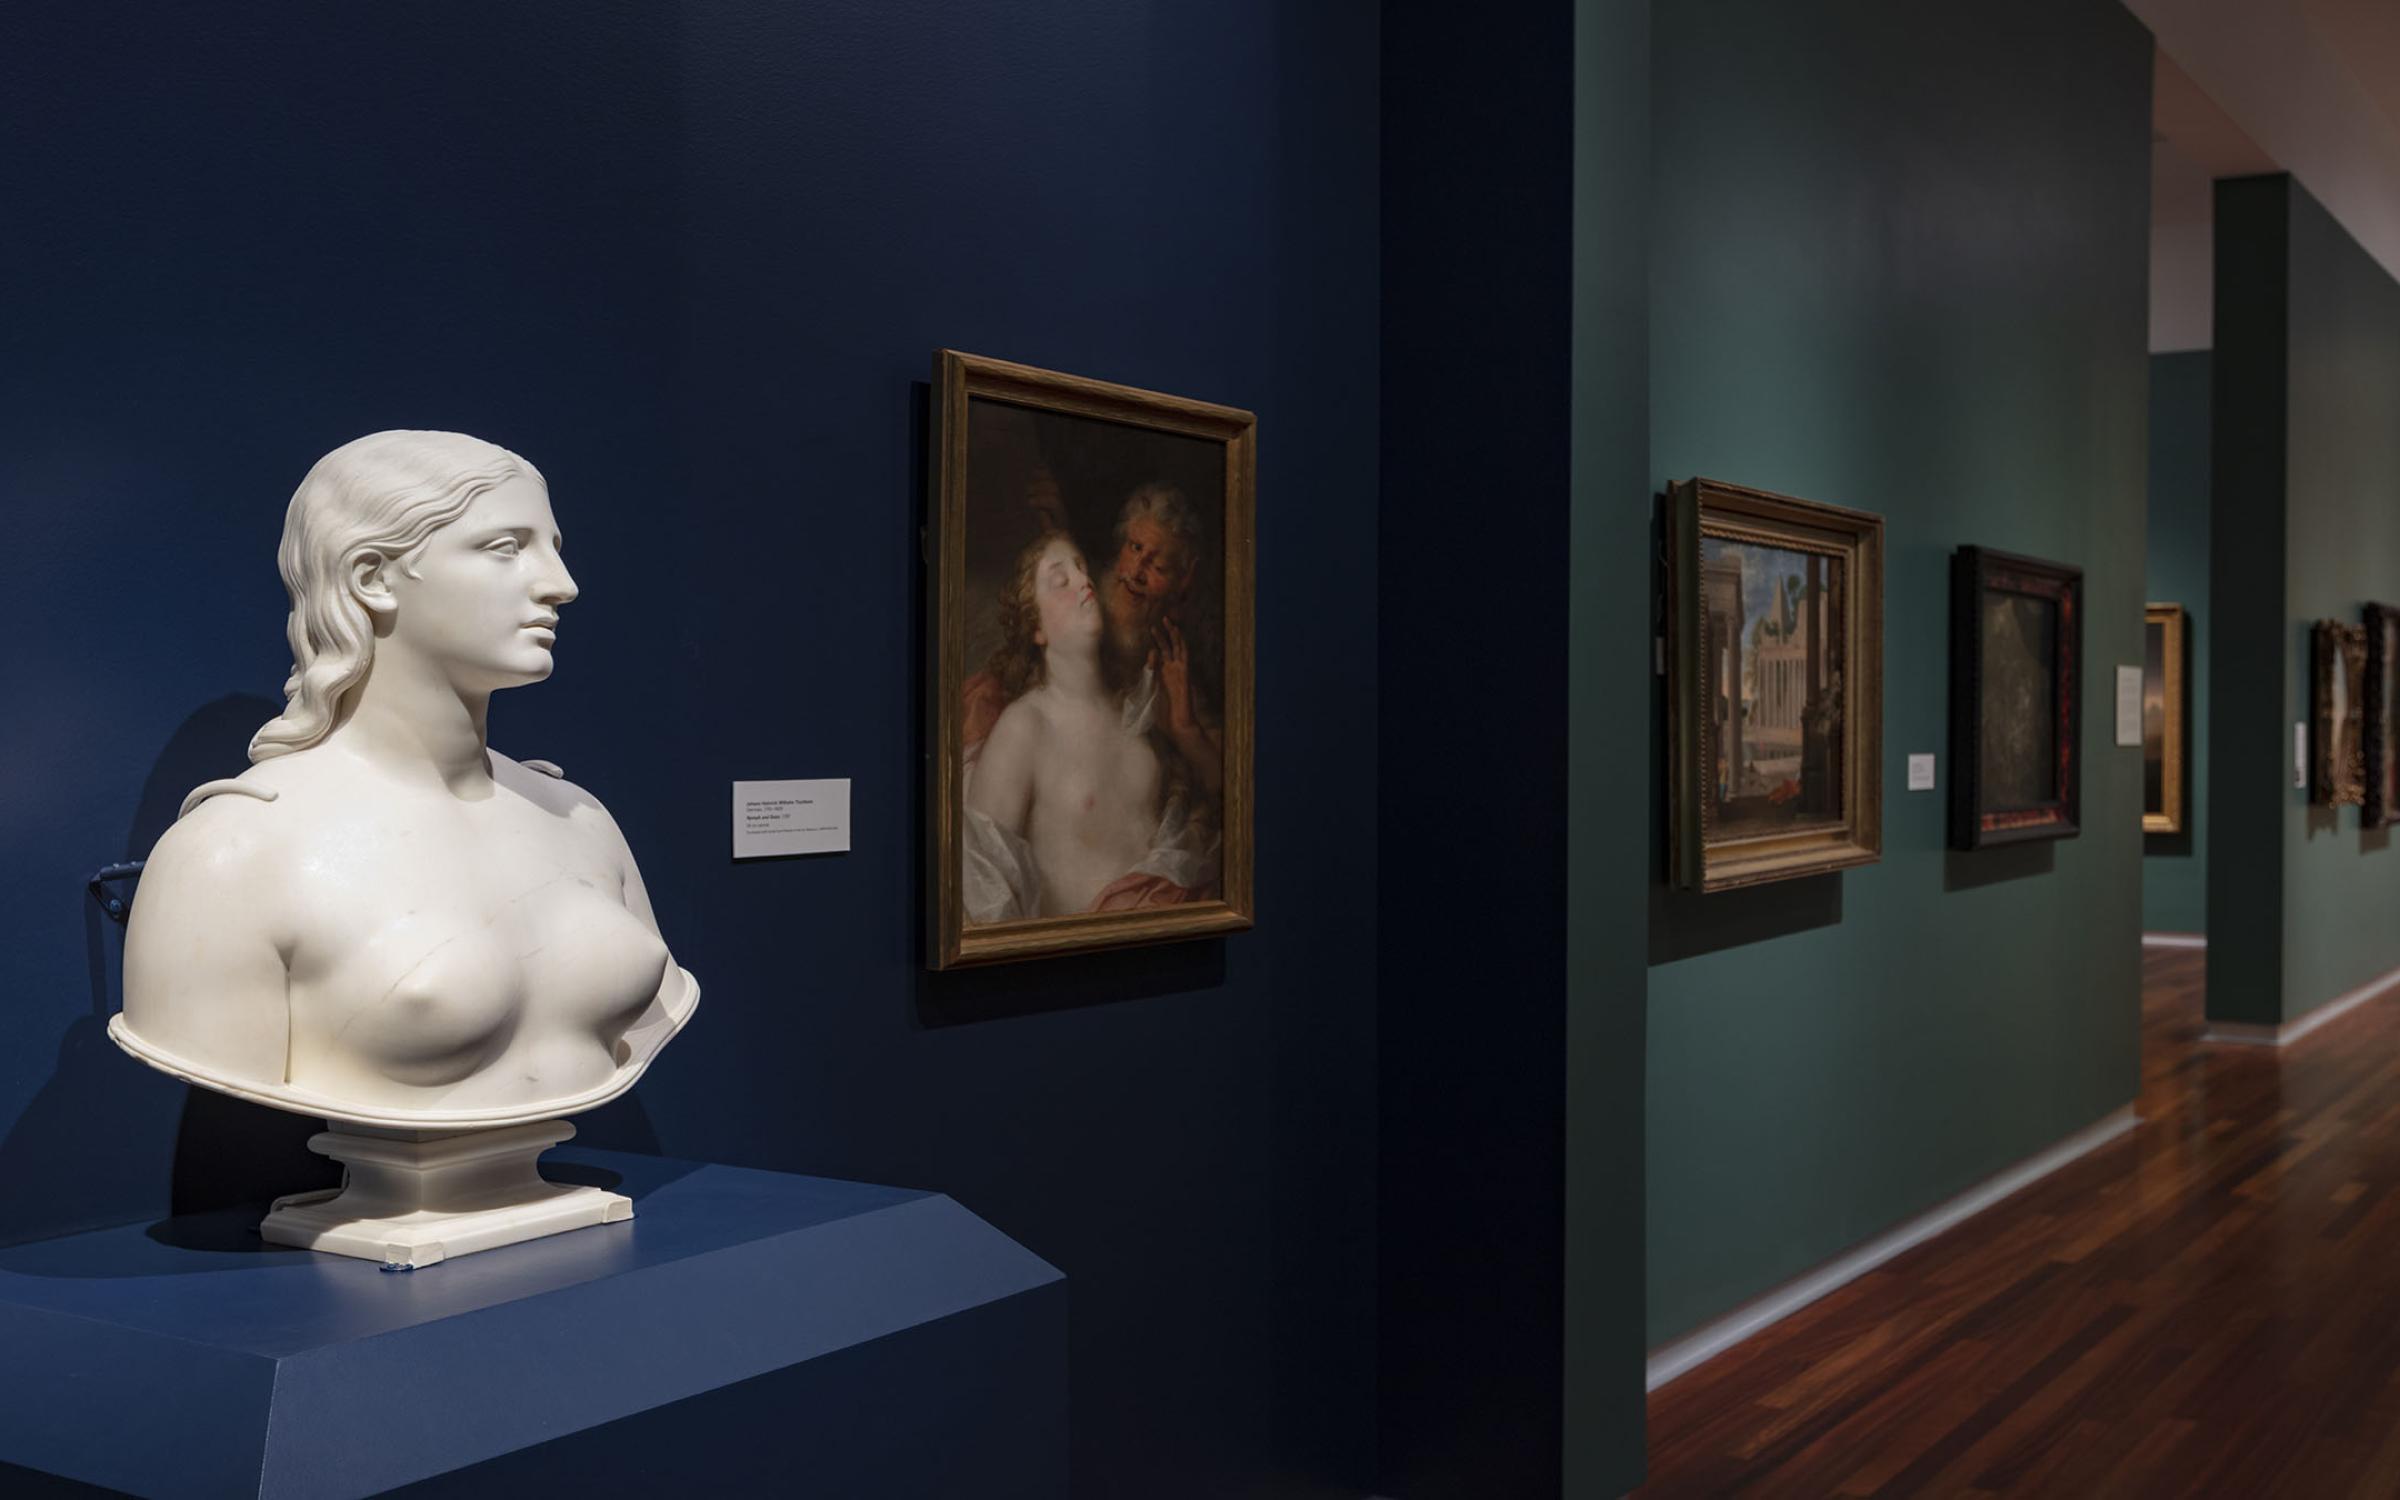 A white statue of a nude woman's bust sits on a dark blue platform. There are paintings on the jewel-toned walls in the background.